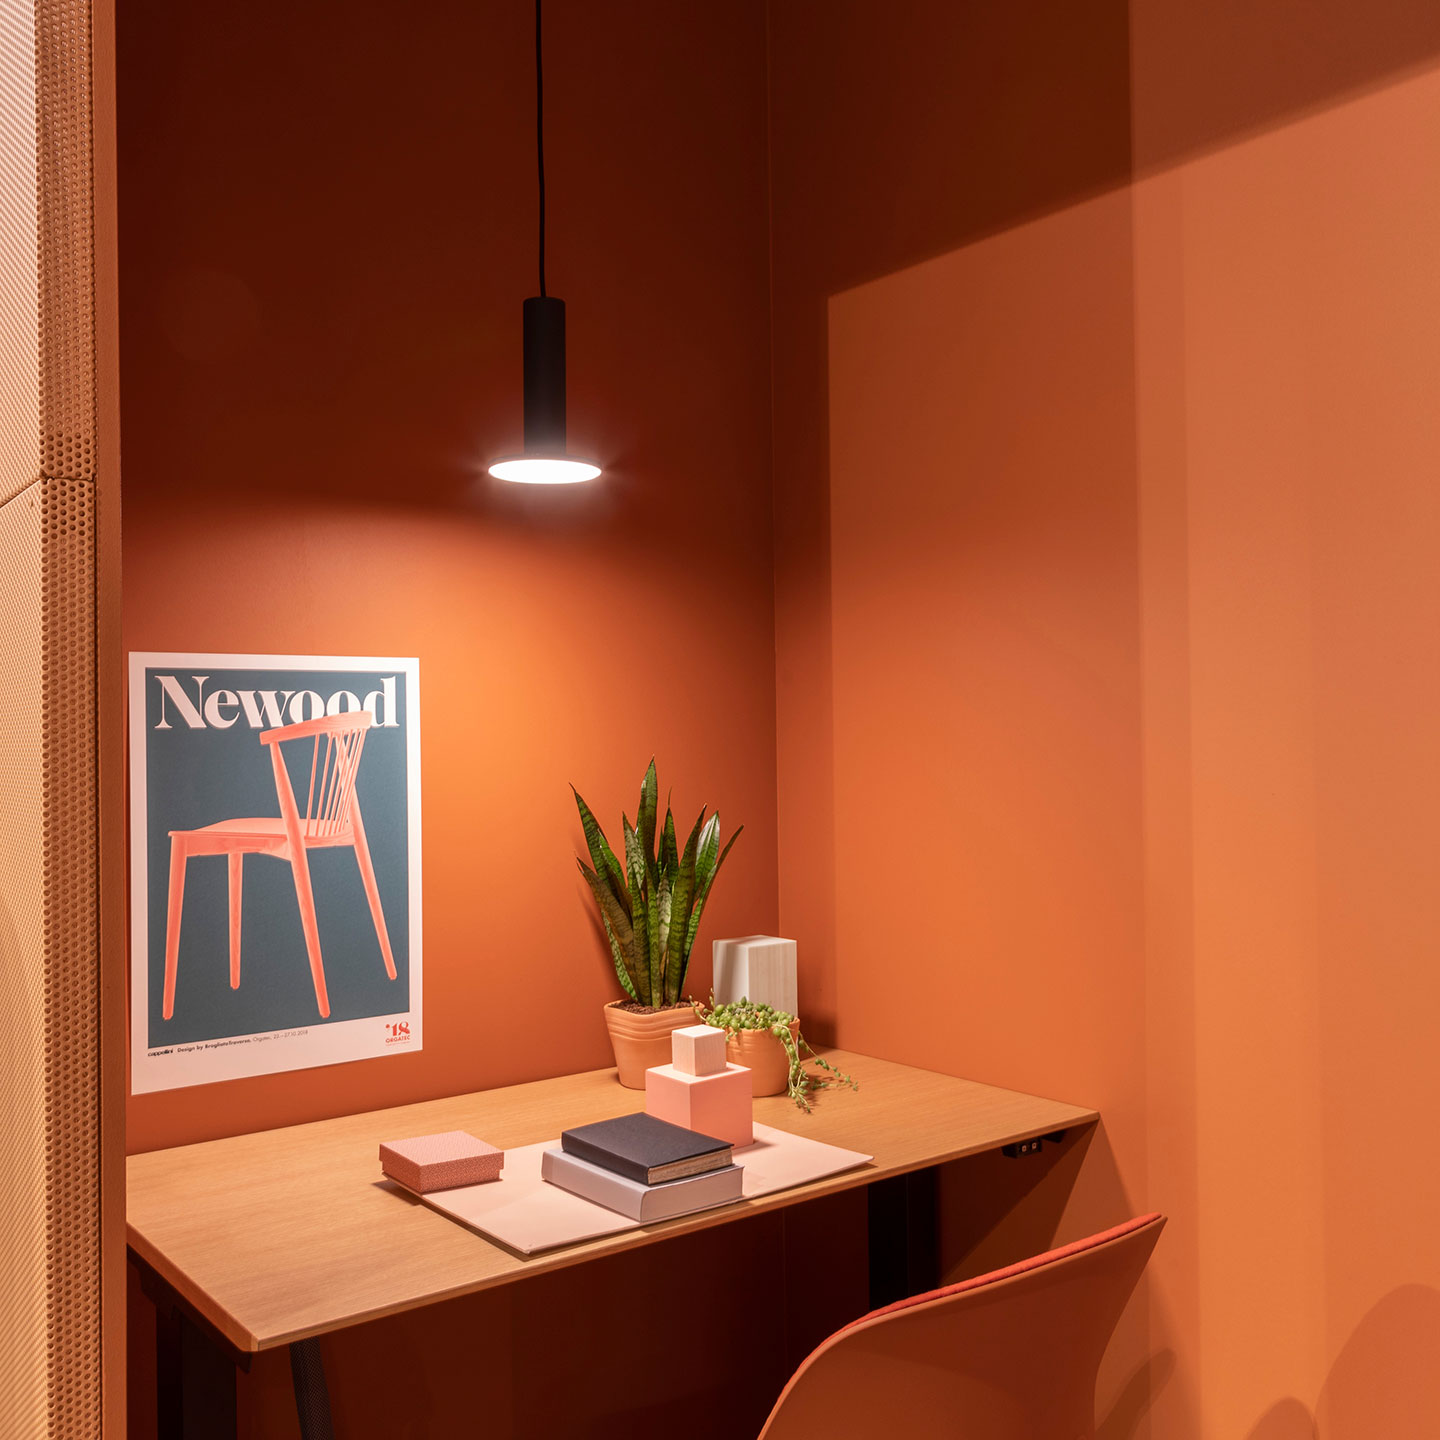 Haworth Cielo Lighting in black above a private desk space with orange walls and chairs for privacy